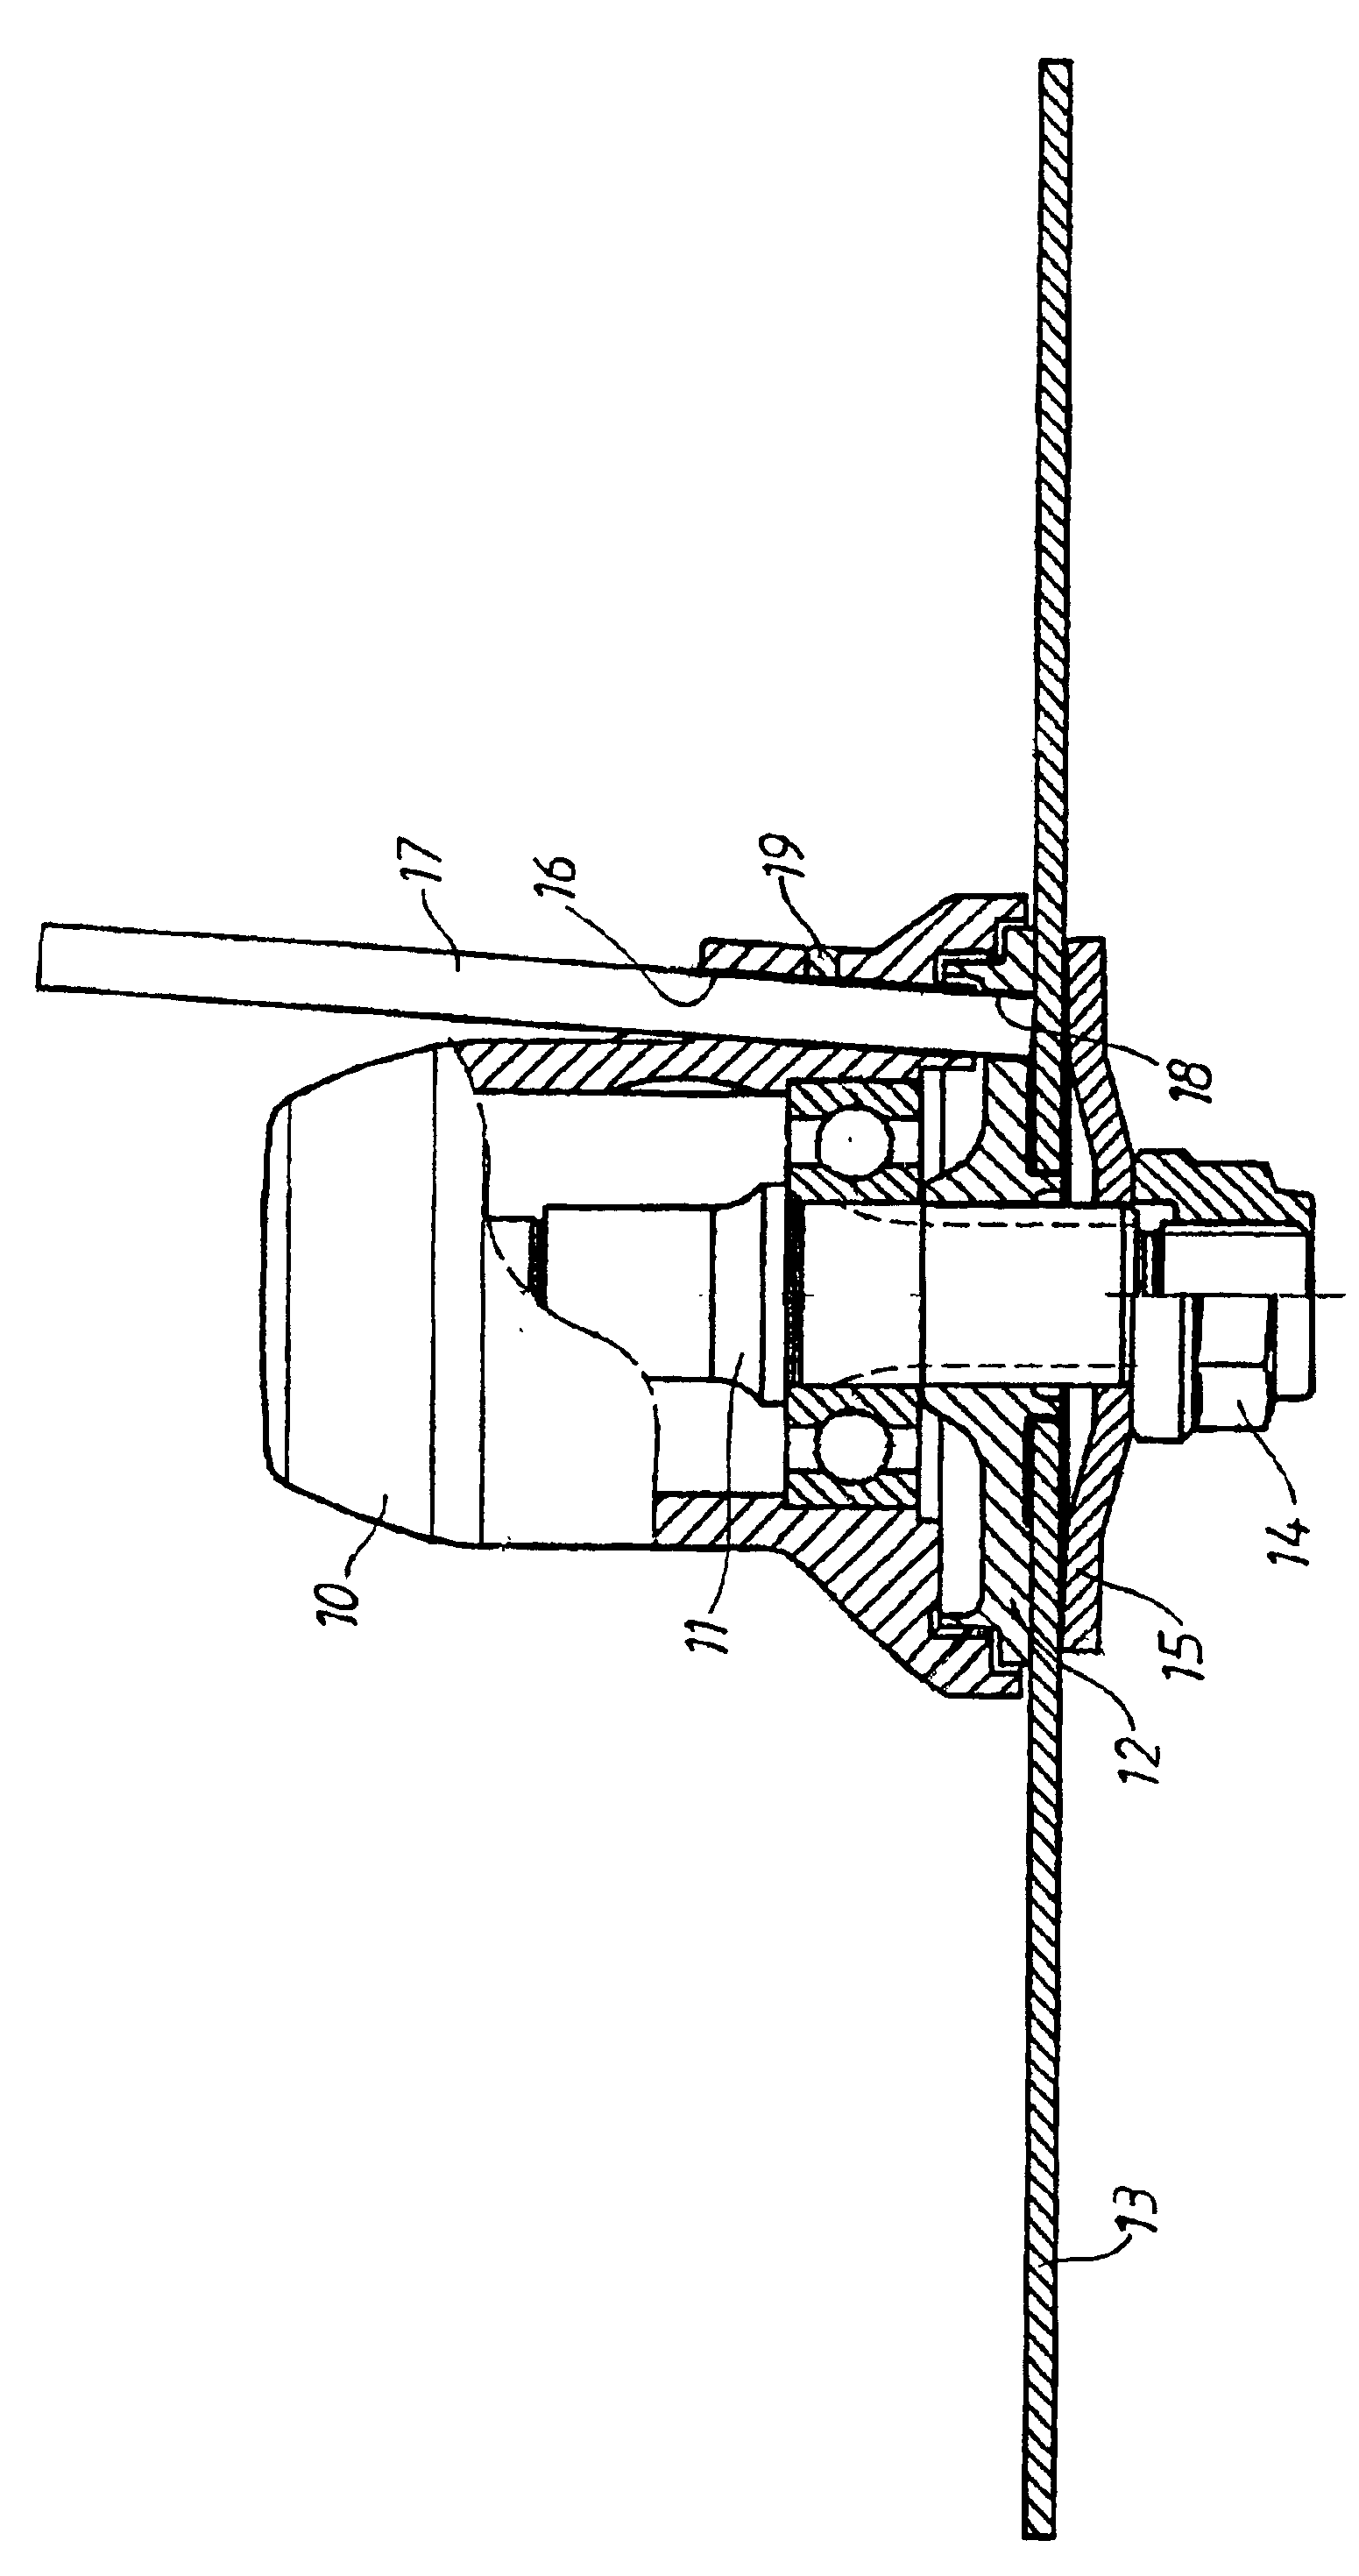 Device in a portable power tool